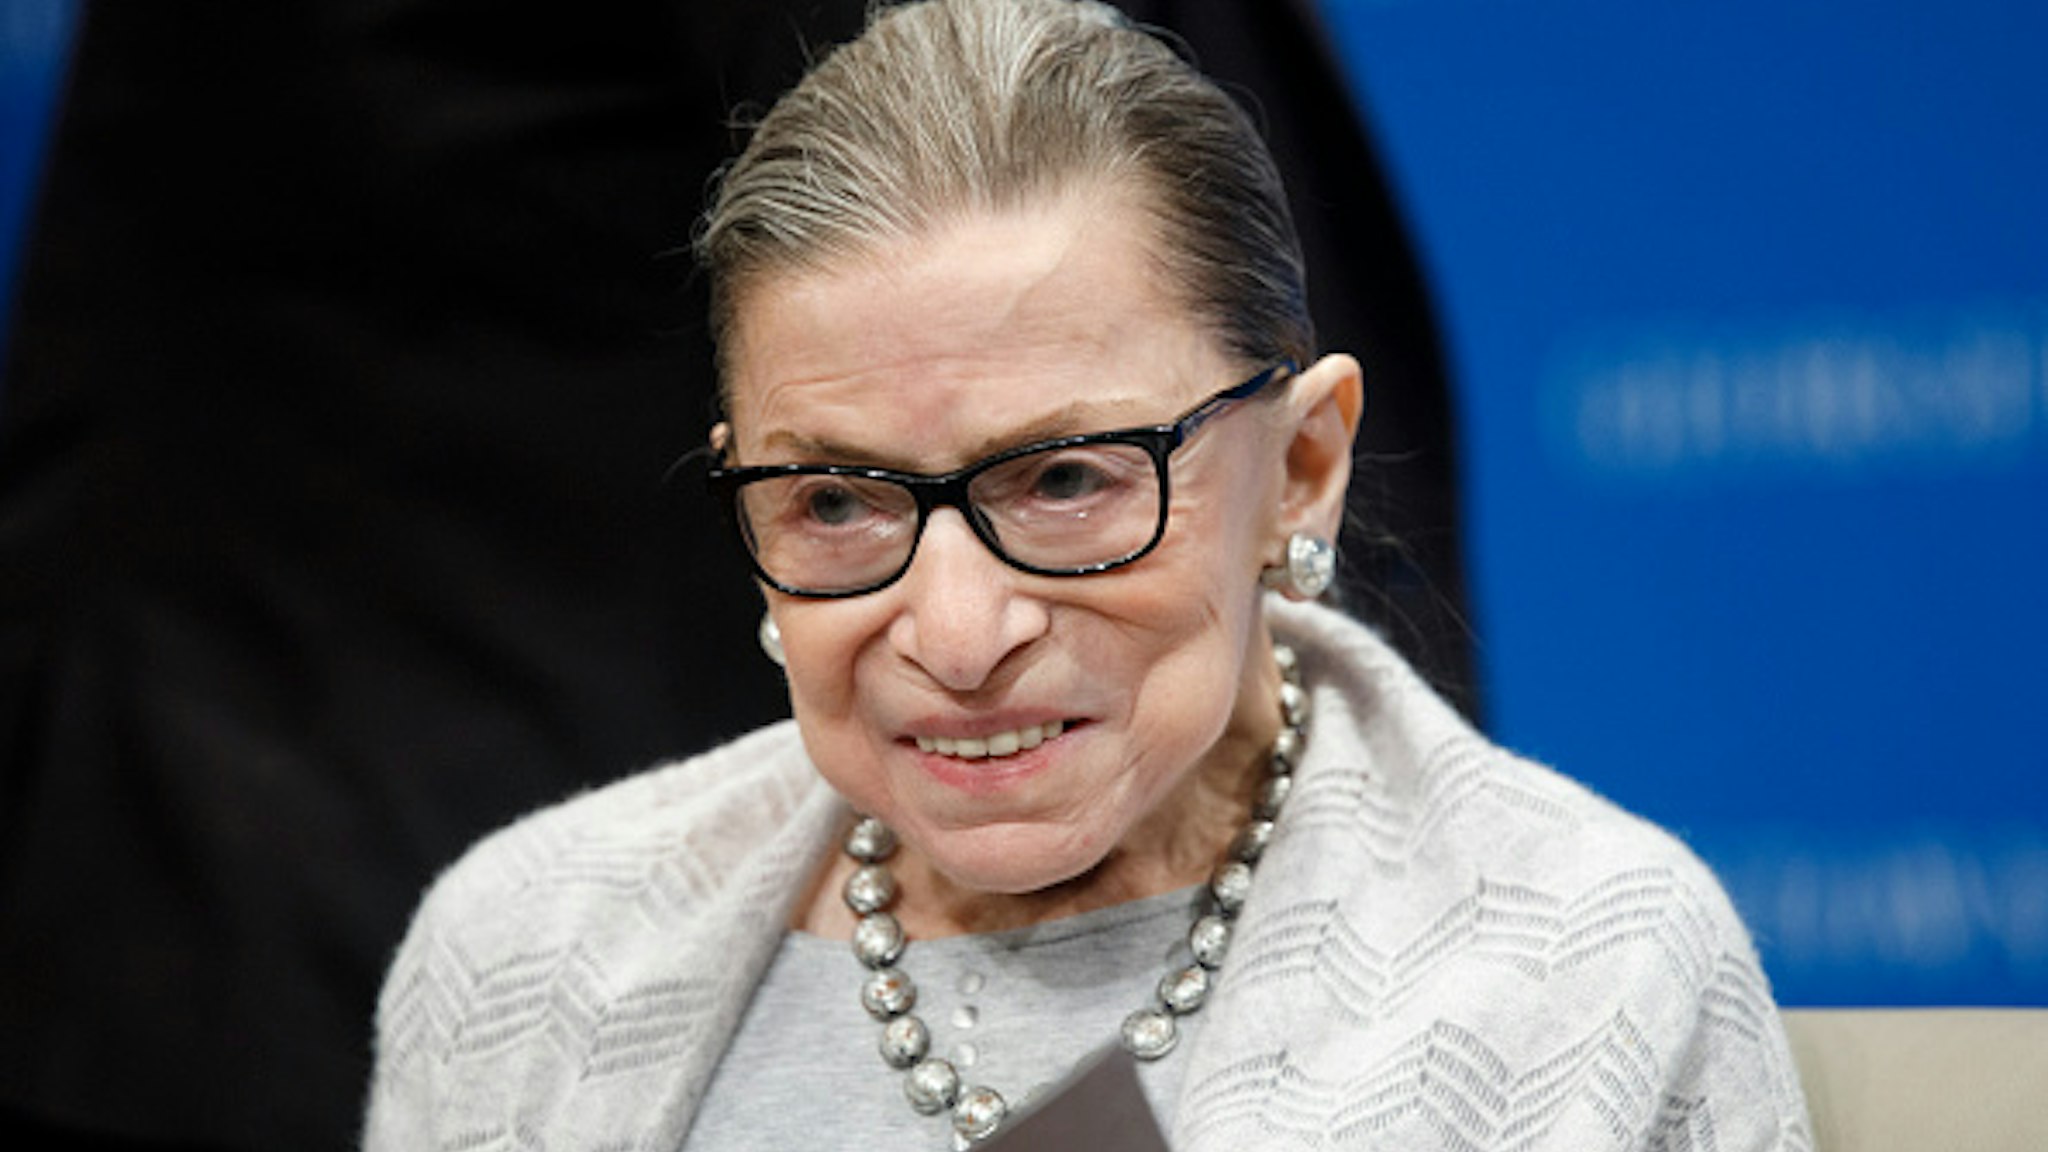 WASHINGTON, DC - SEPTEMBER 12: Supreme Court Justice Ruth Bader Ginsburg delivers remarks at the Georgetown Law Center on September 12, 2019, in Washington, DC. Justice Ginsburg spoke to over 300 attendees about the Supreme Court's previous term.